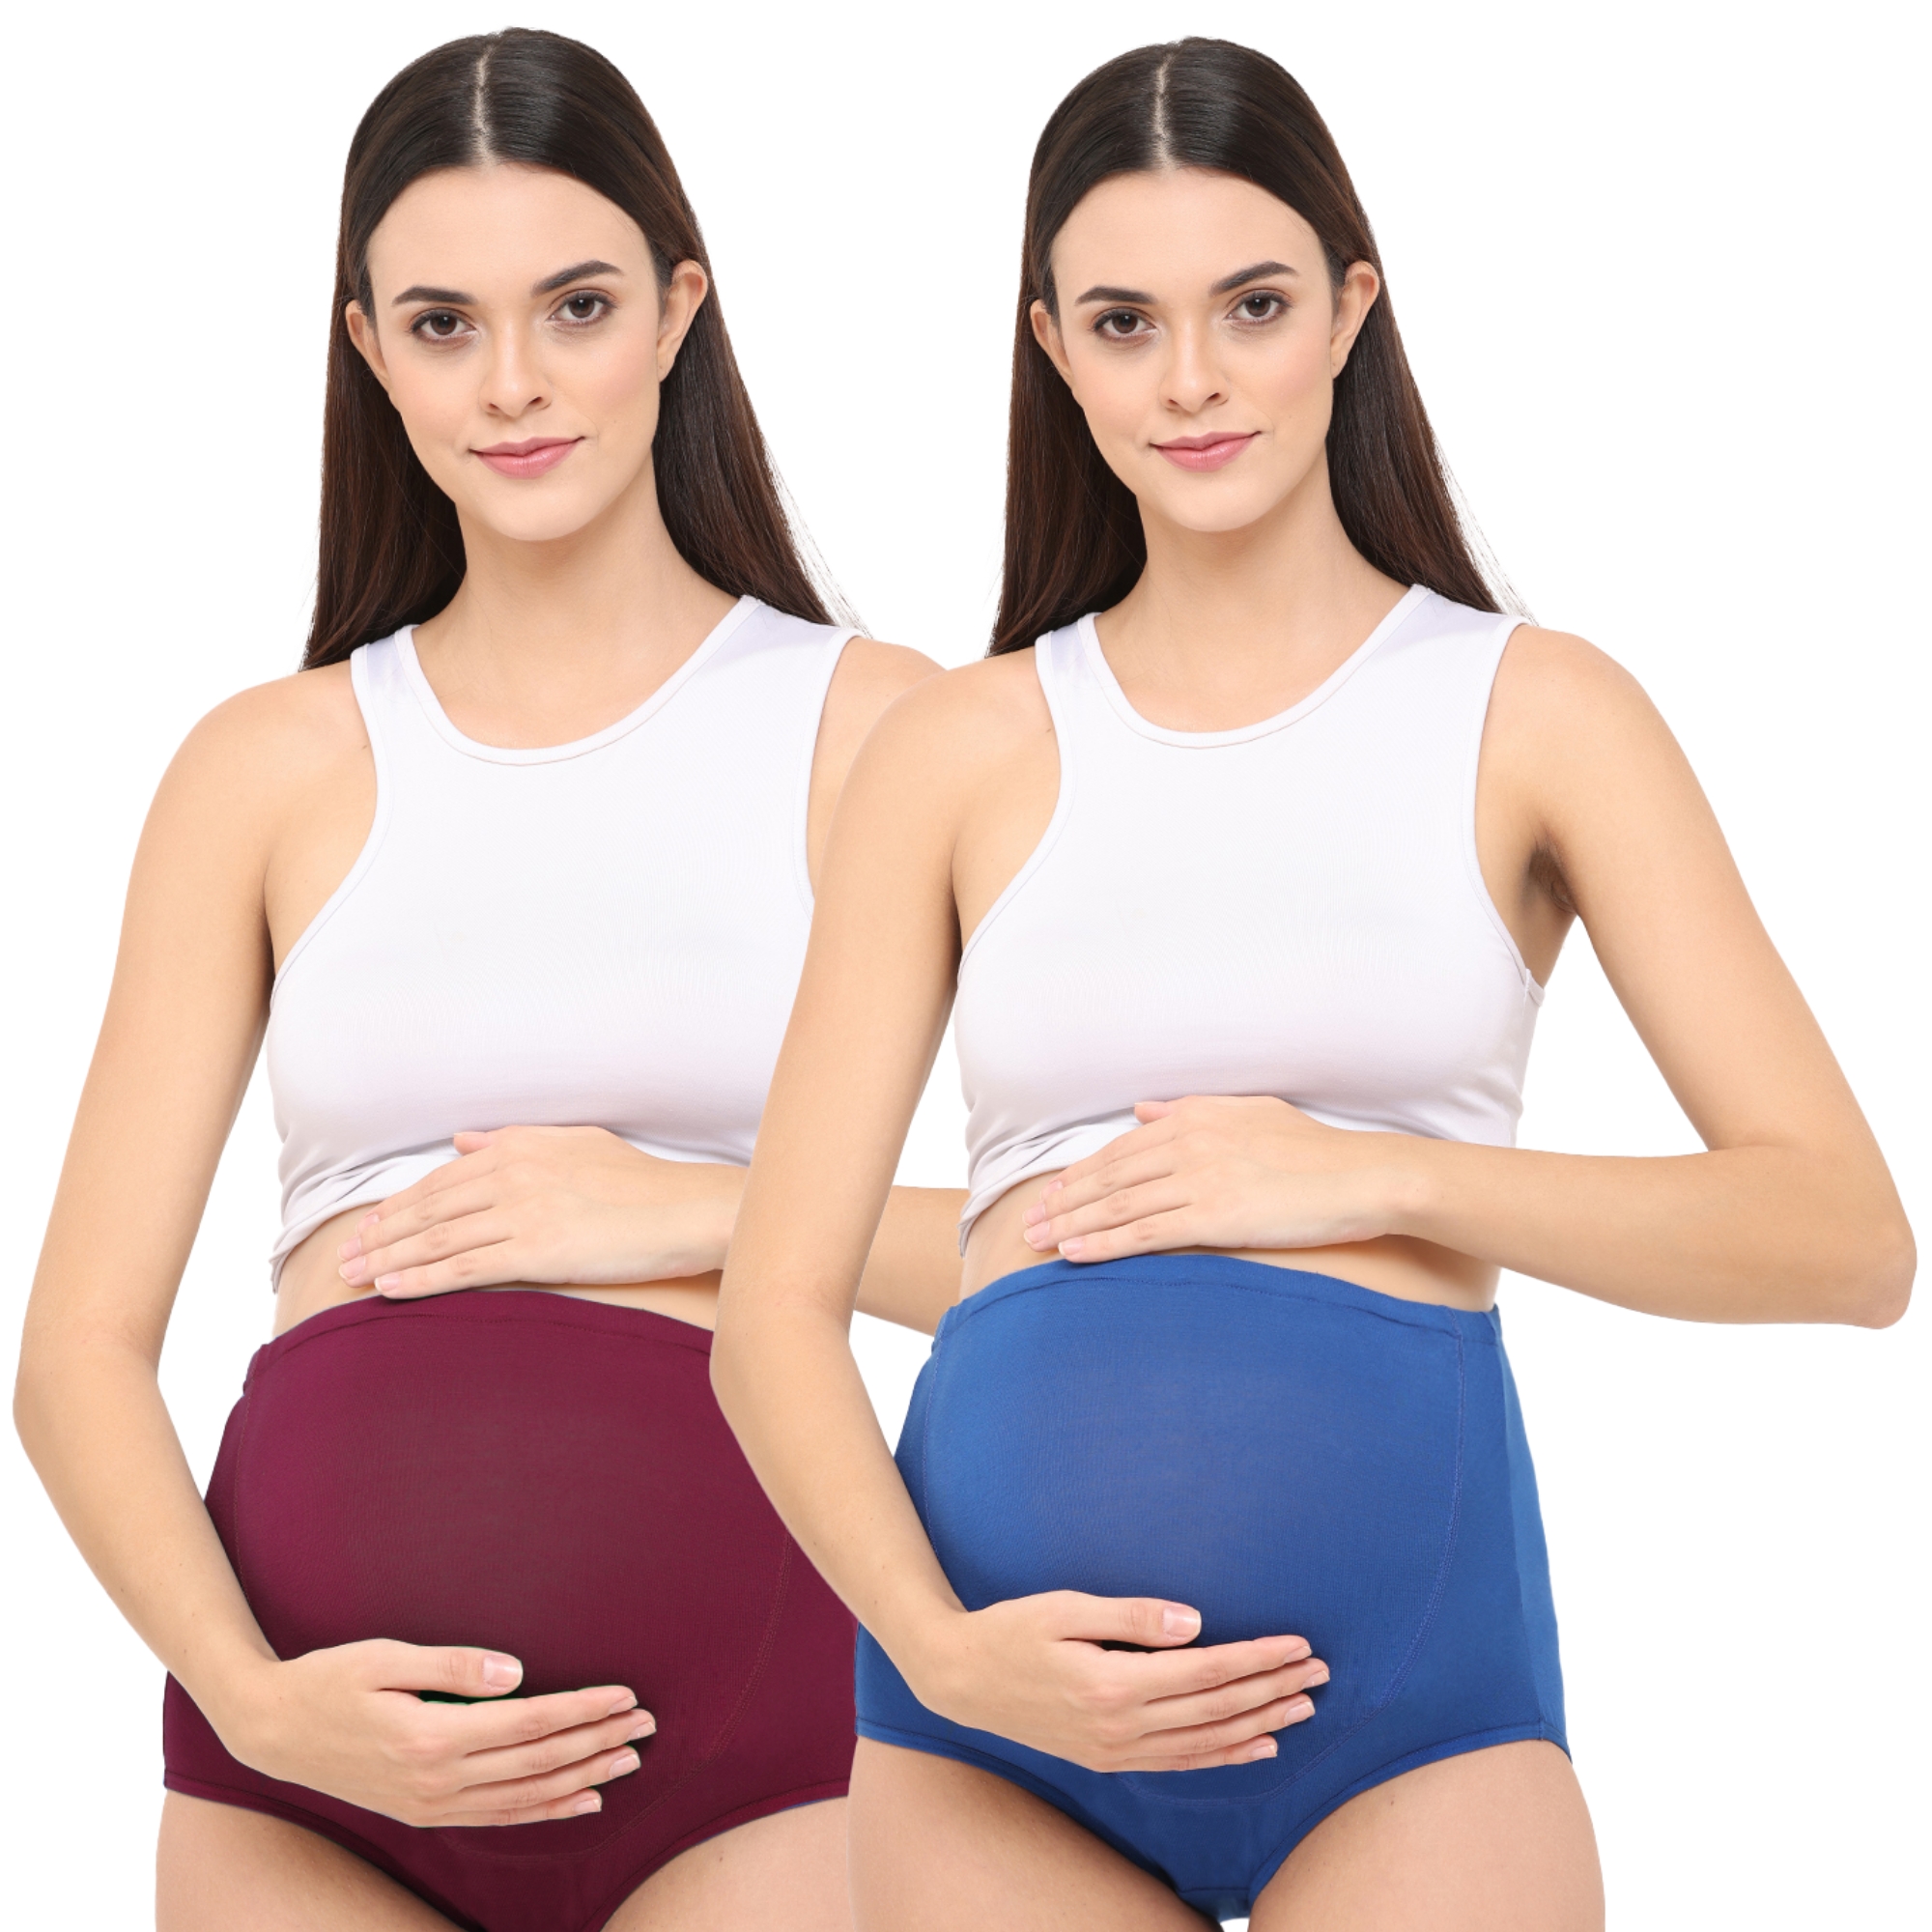 High Waist Maternity/Postpartum Panty - Anti-Microbial with Comfy Adjustable Waistband - Blue & Wine - M - Pack of 2